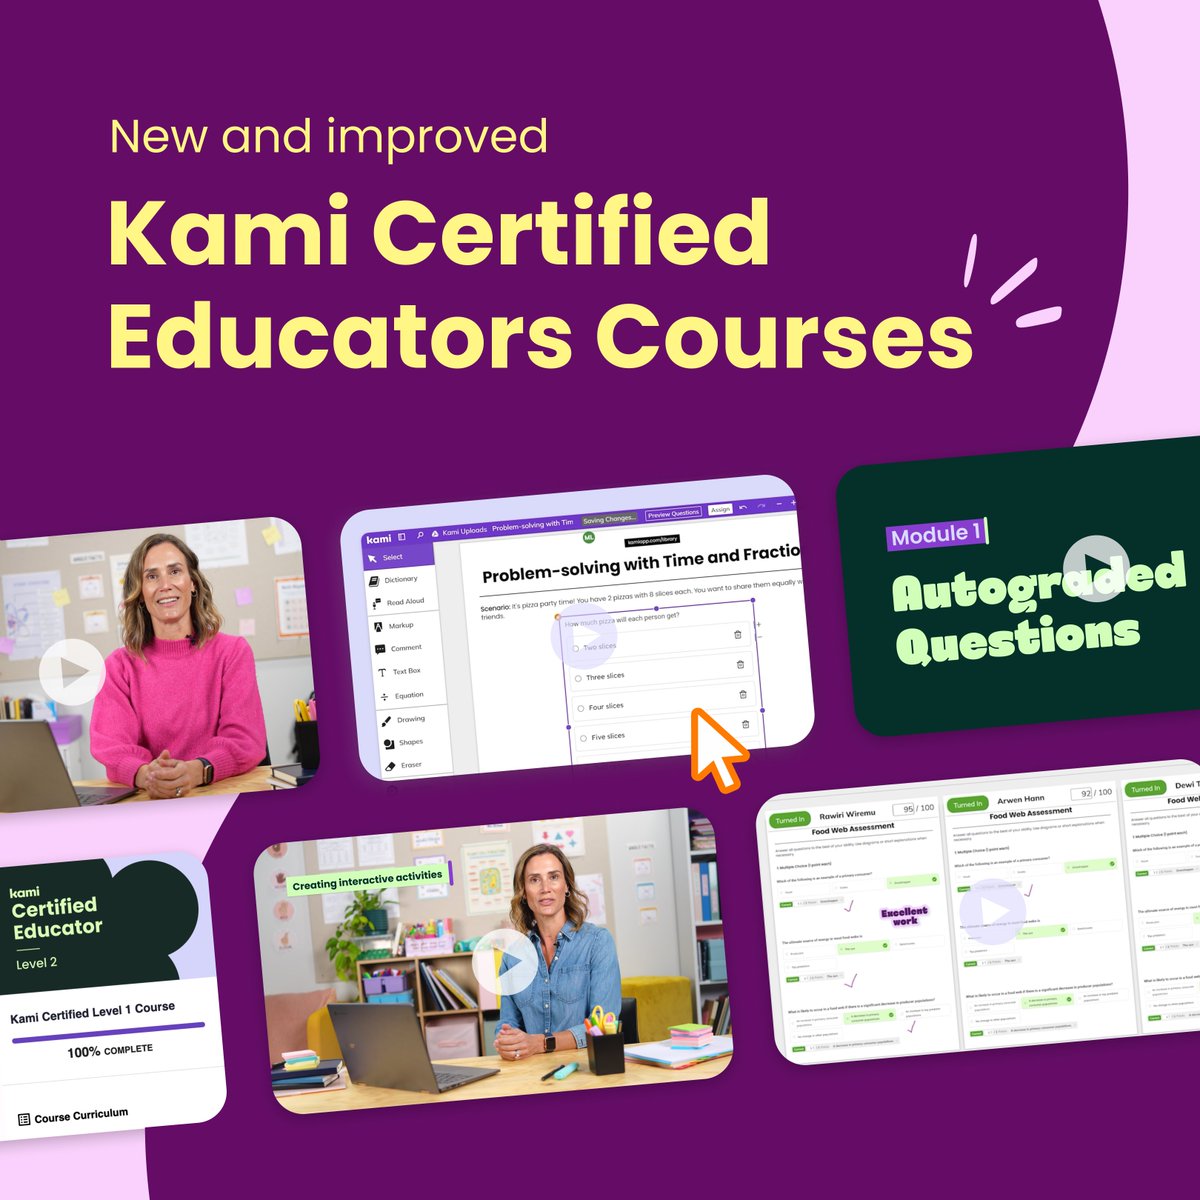 Wow! Be one of the first 1,000 people to complete the new and improved Kami Certified Level 1 course in May, and you’ll automatically be in to win a $1k classroom shopping spree! Come on UK let's get some of you in this draw. Apply now ➡️ kamiapp.com/certified